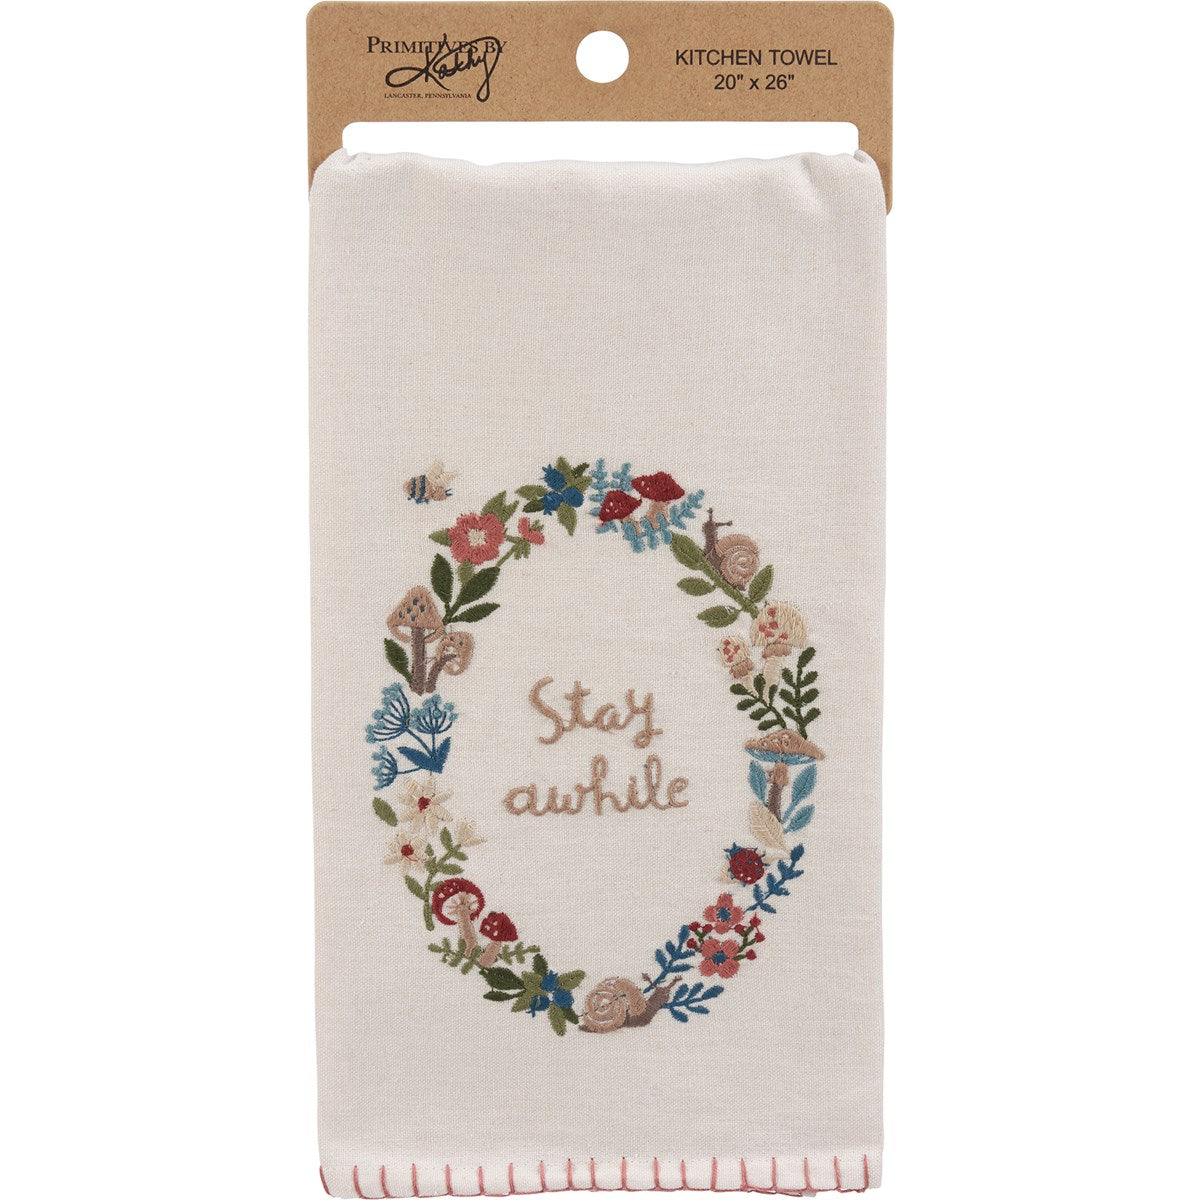 Stay Awhile Floral Cottagecore Kitchen Towel